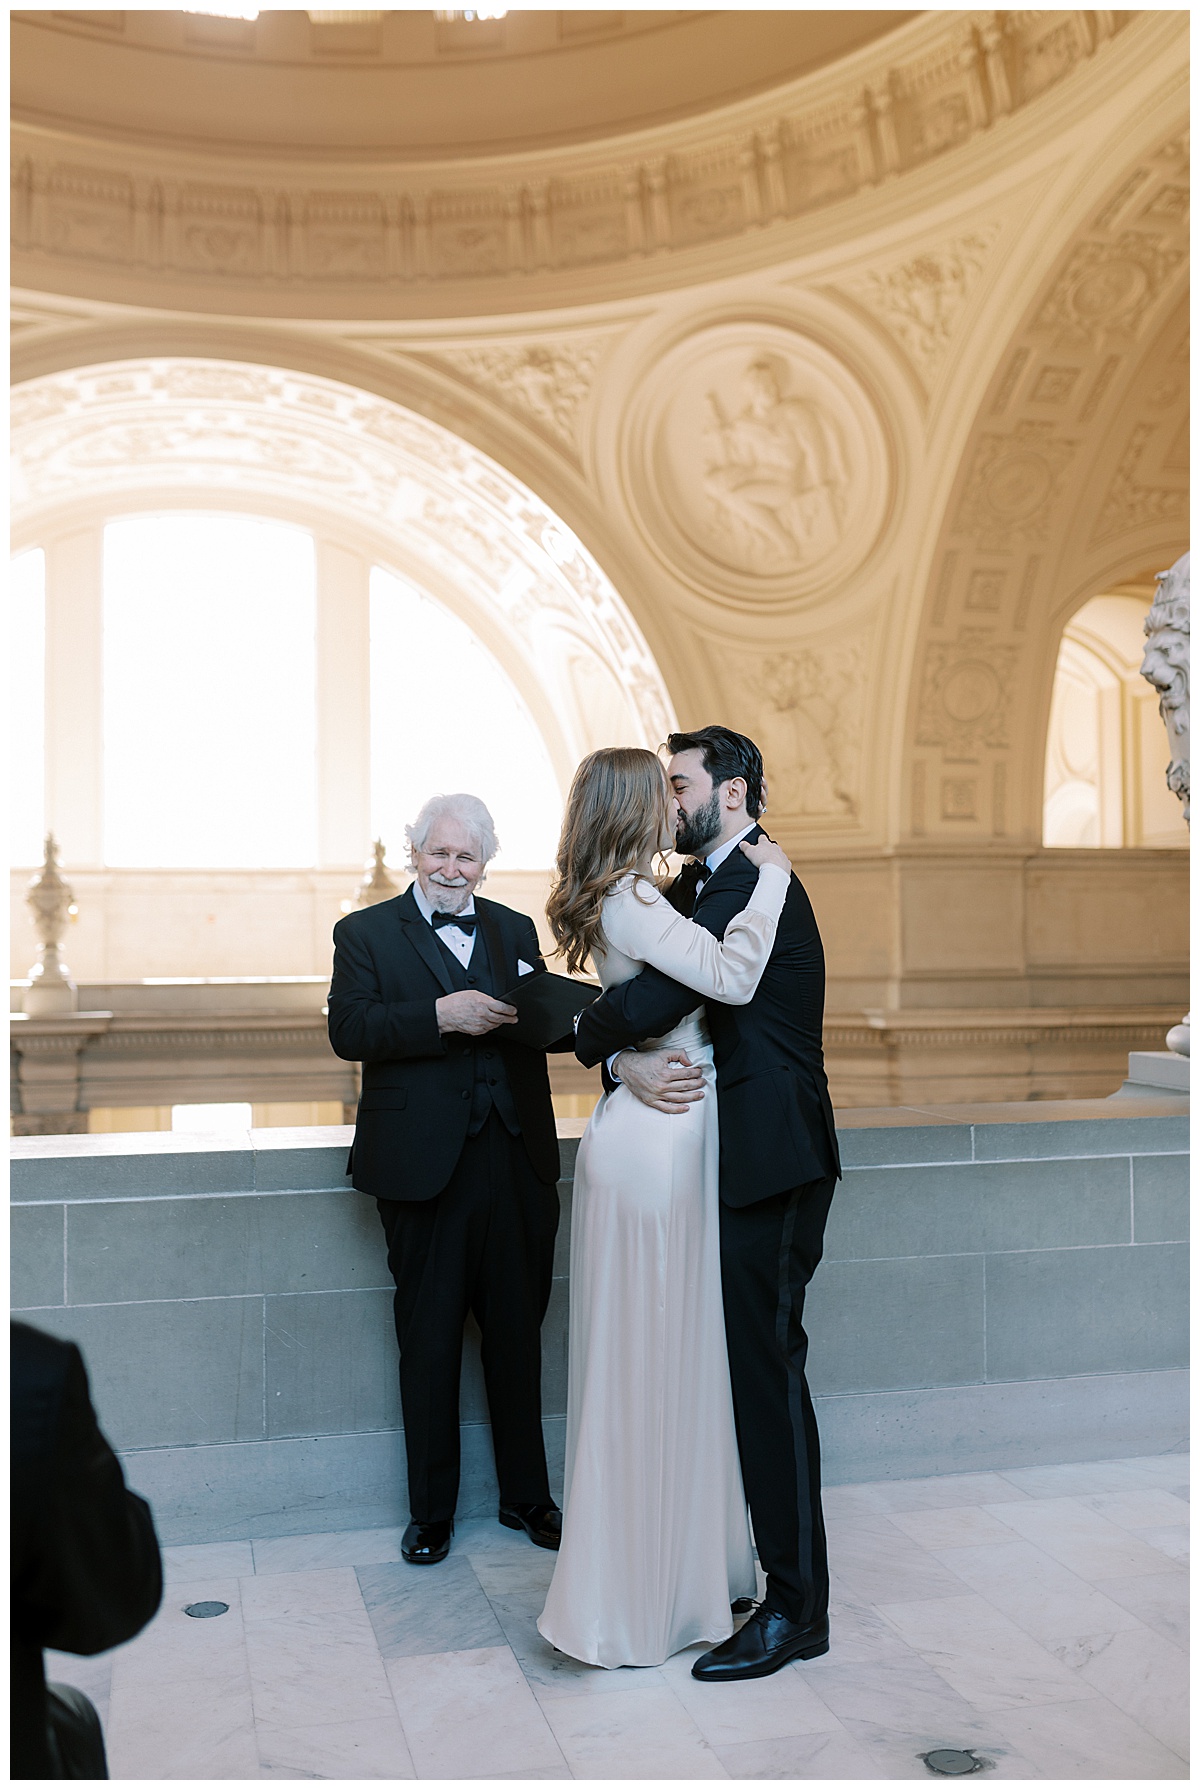 Caitlin and Guilherme's glamorous SF City Hall elopement ceremony